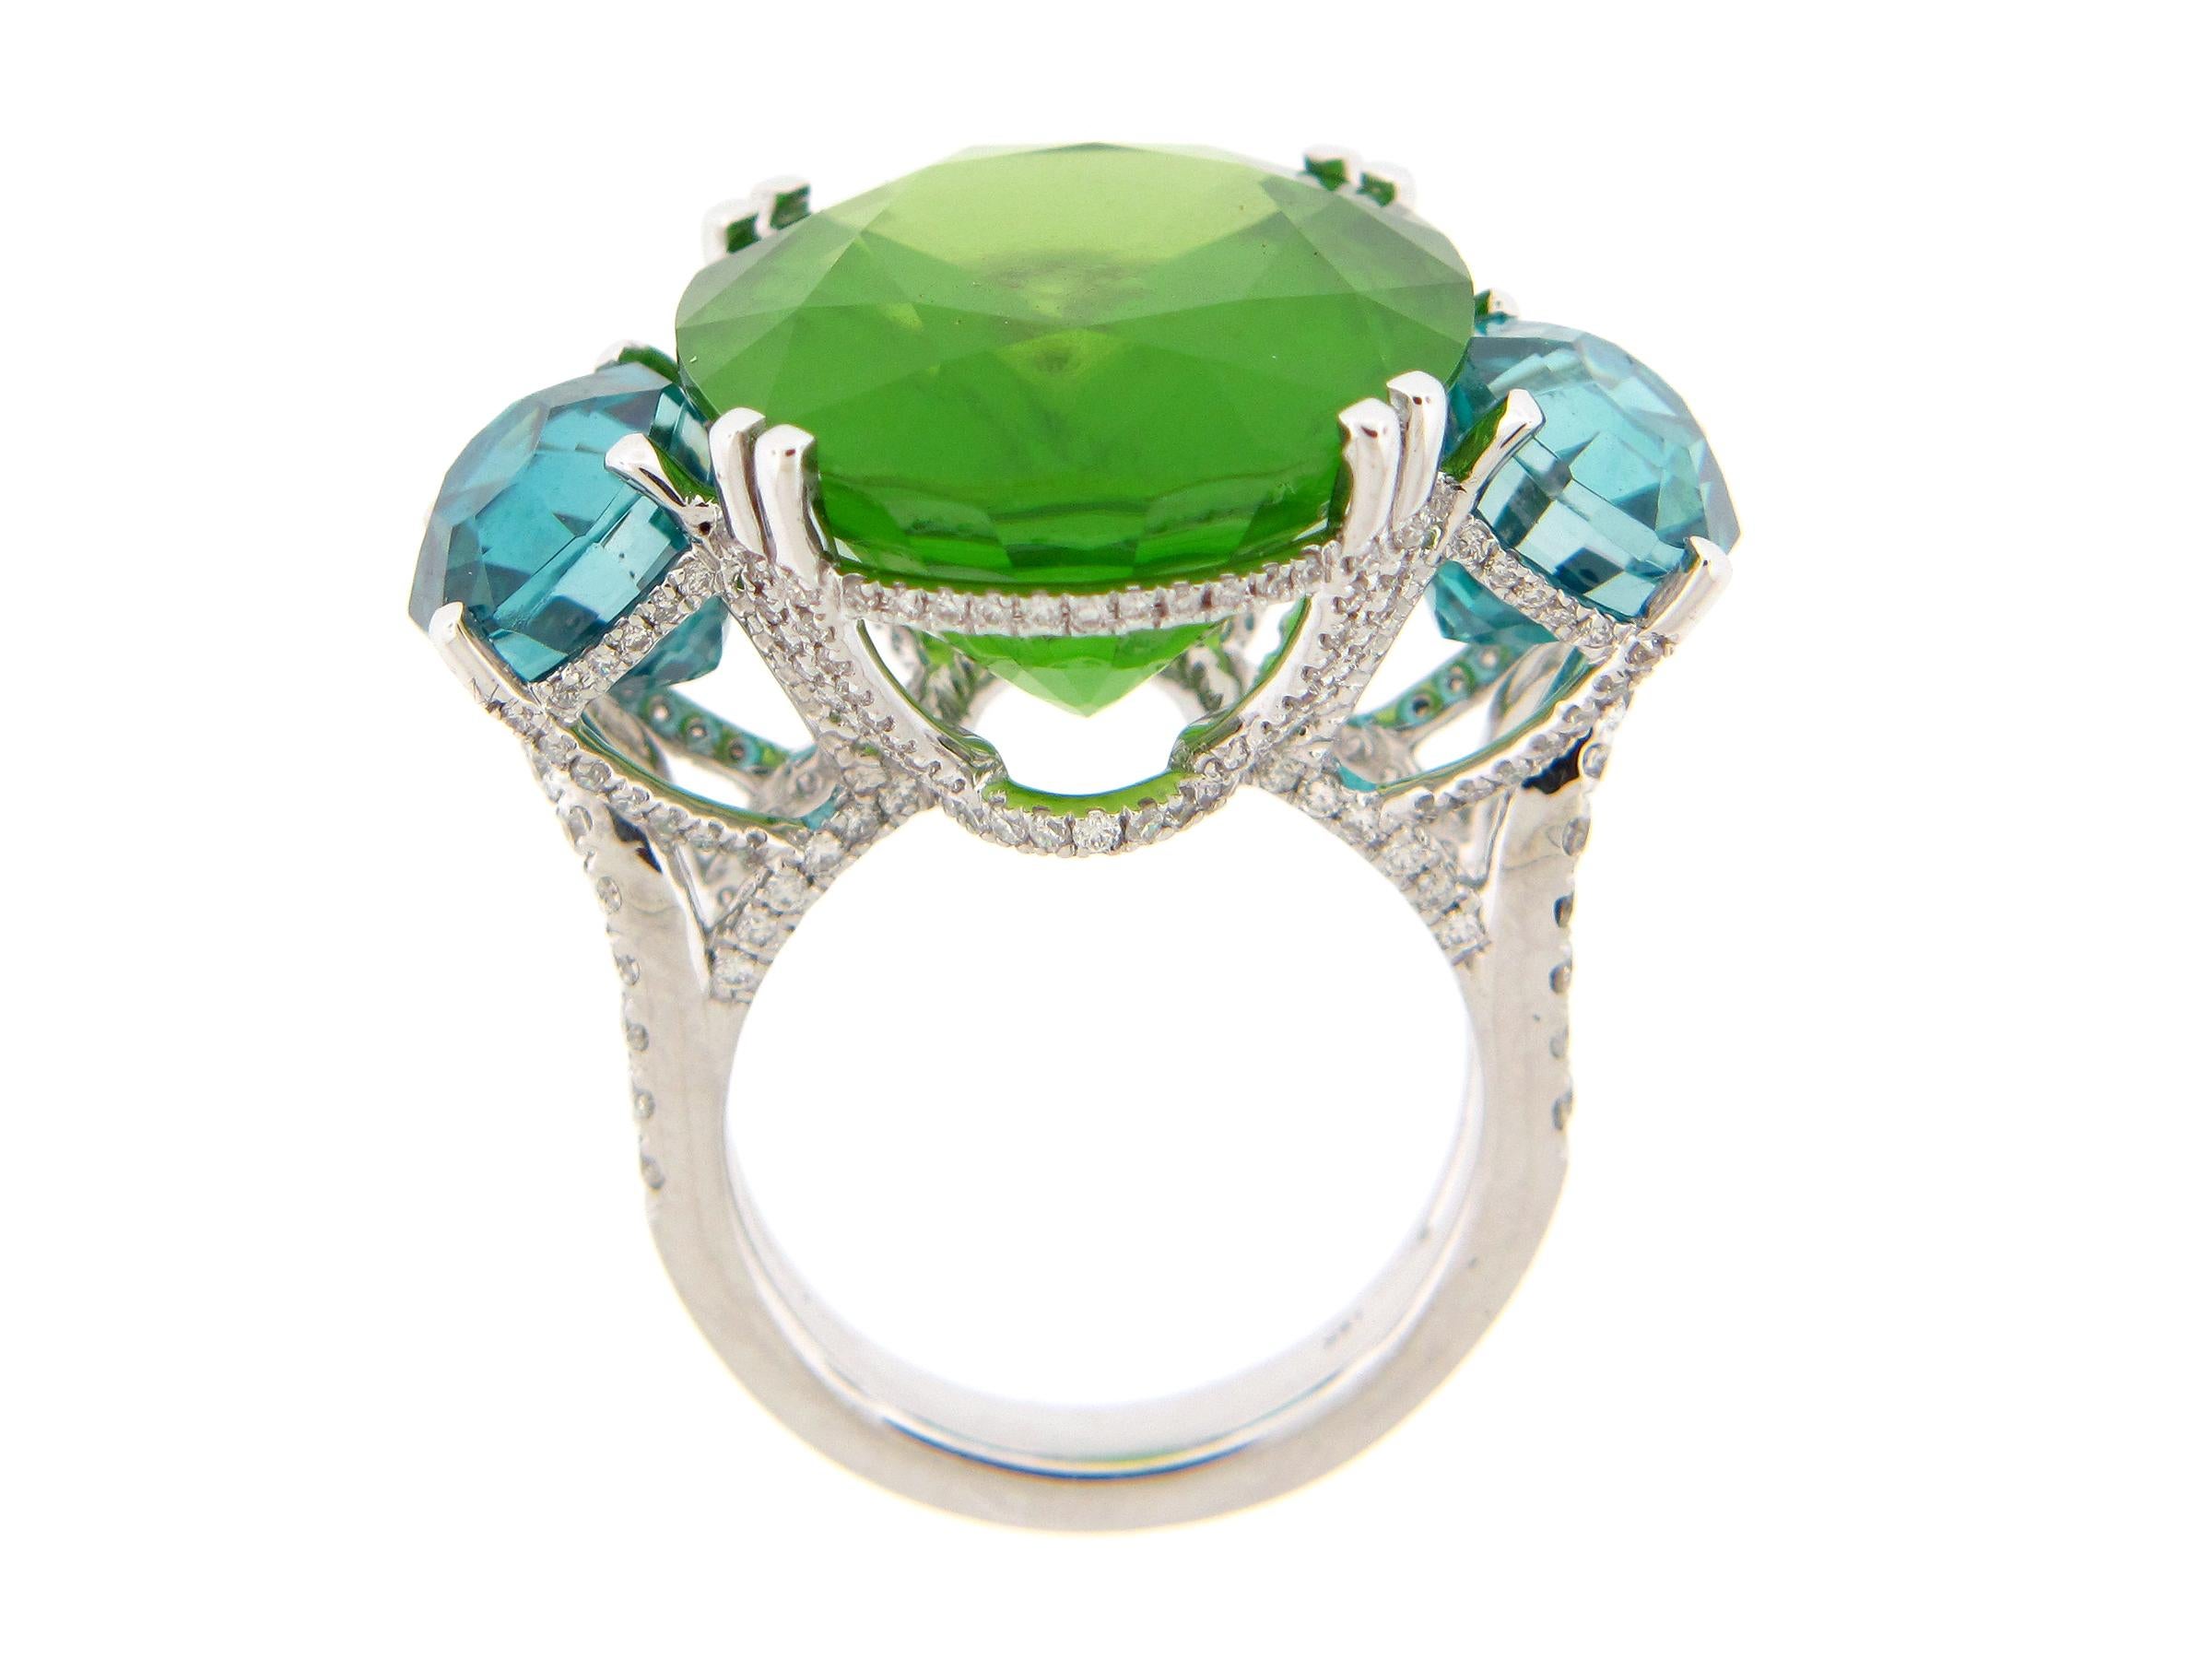 This stunning ring features a 28.10 Carat Green Oval Burmese Peridot flanked by two Fancy Cut Blue Zircon side stones (10.41 carats) held in a diamond encrusted basket on a double diamond shank, set in 18k white gold. Total diamond weight = 1.13